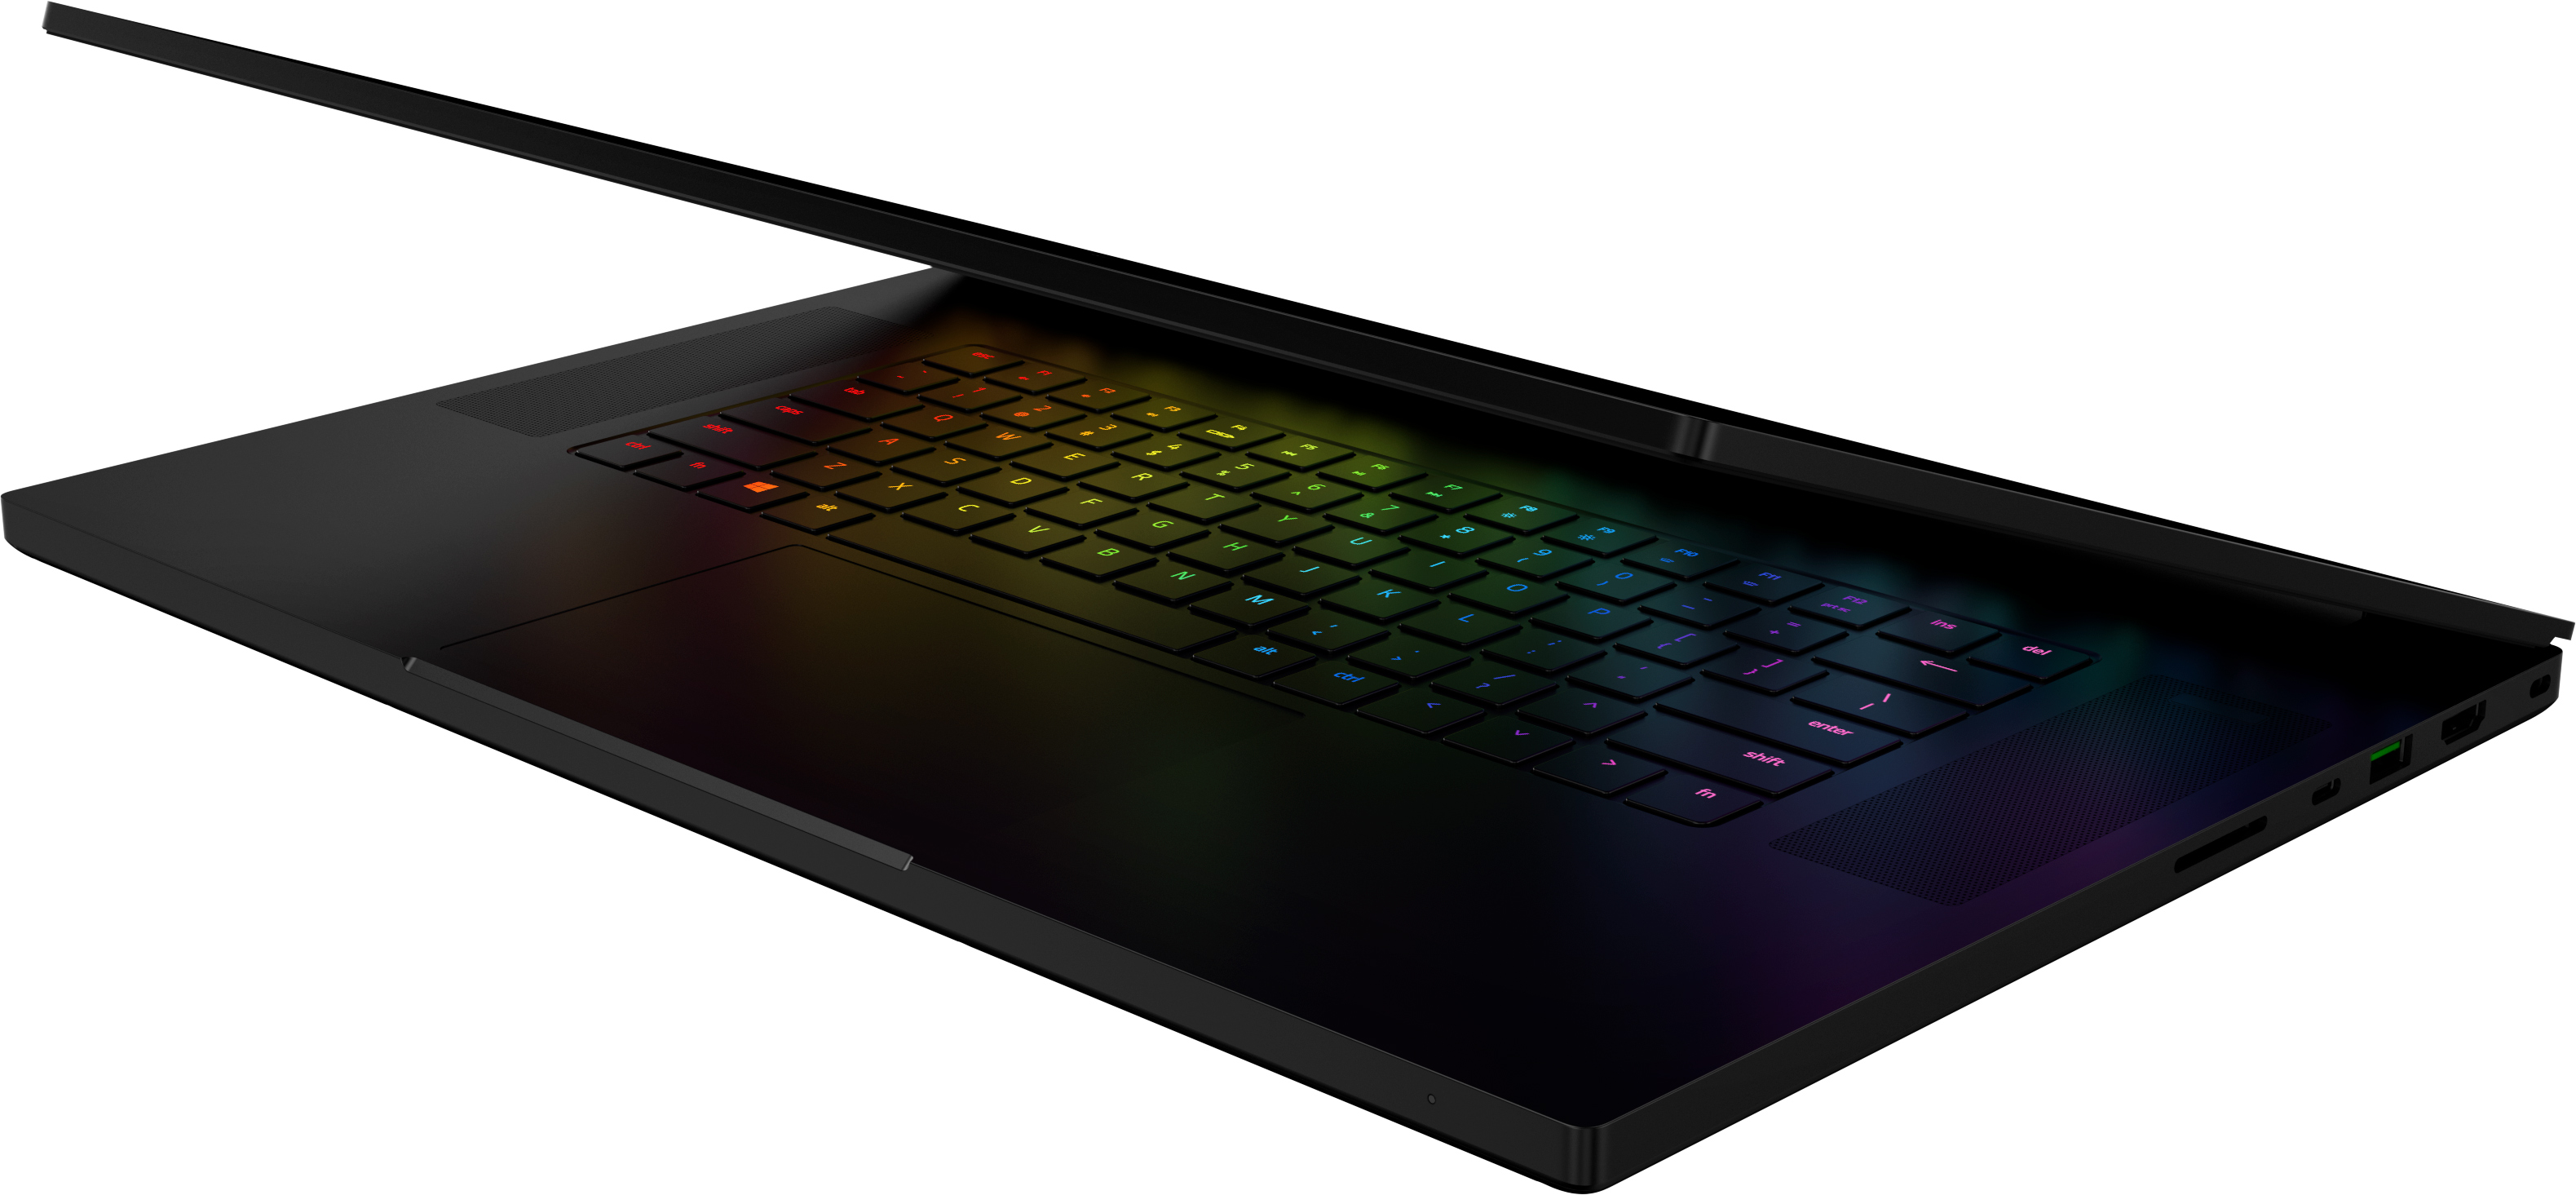 Razer S Blade Pro 17 For Esports Now With A 240 Hz Display